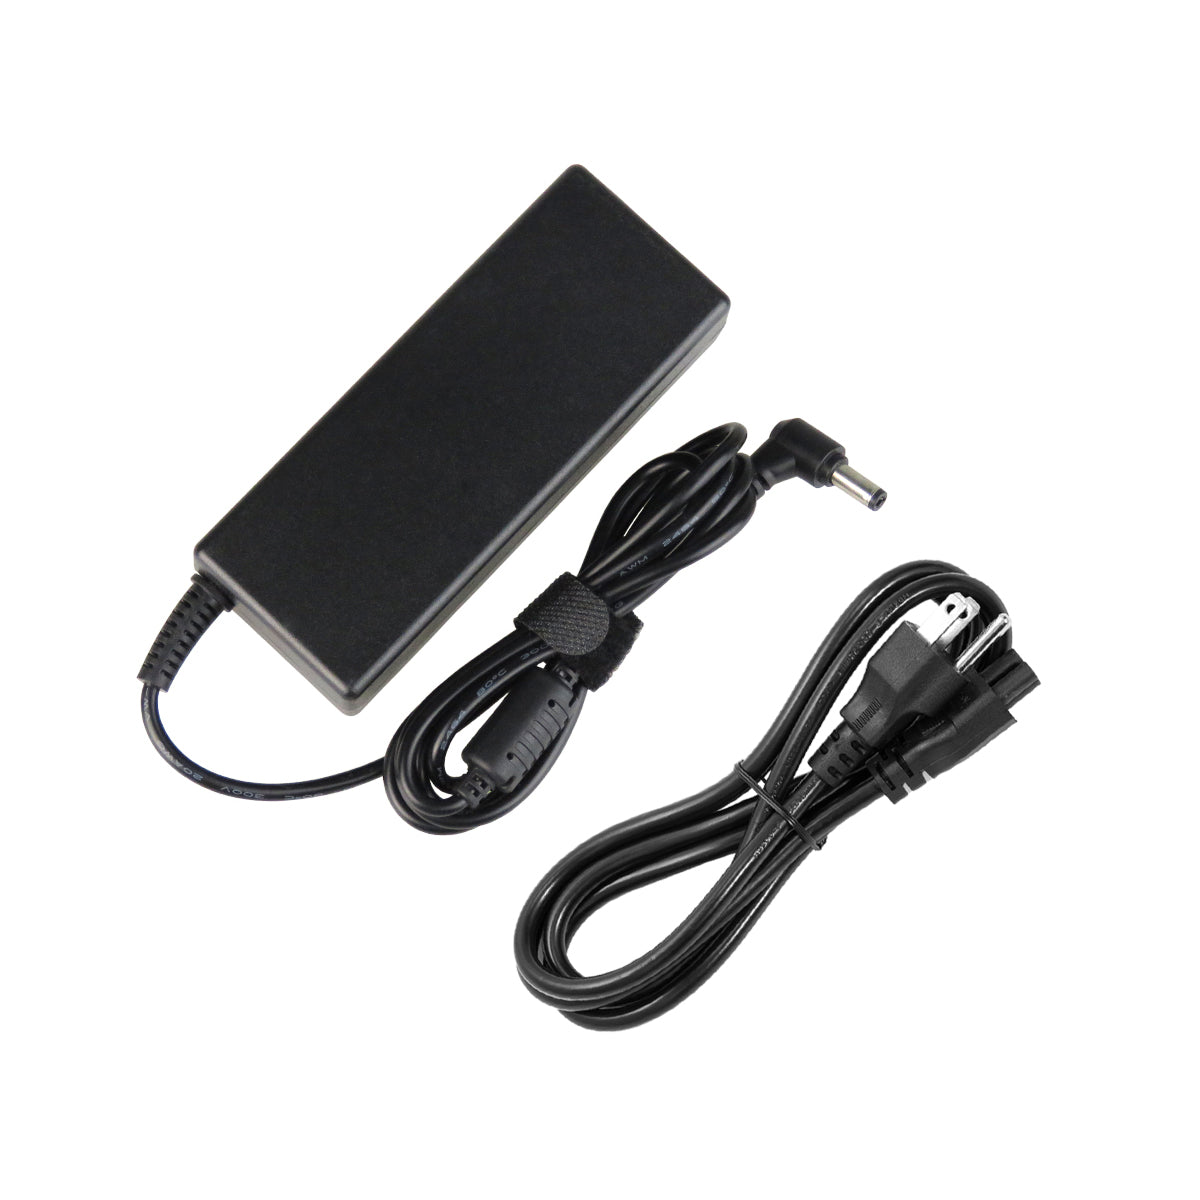 AC Adapter Charger for Toshiba Satellite c55-a5286 Notebook.